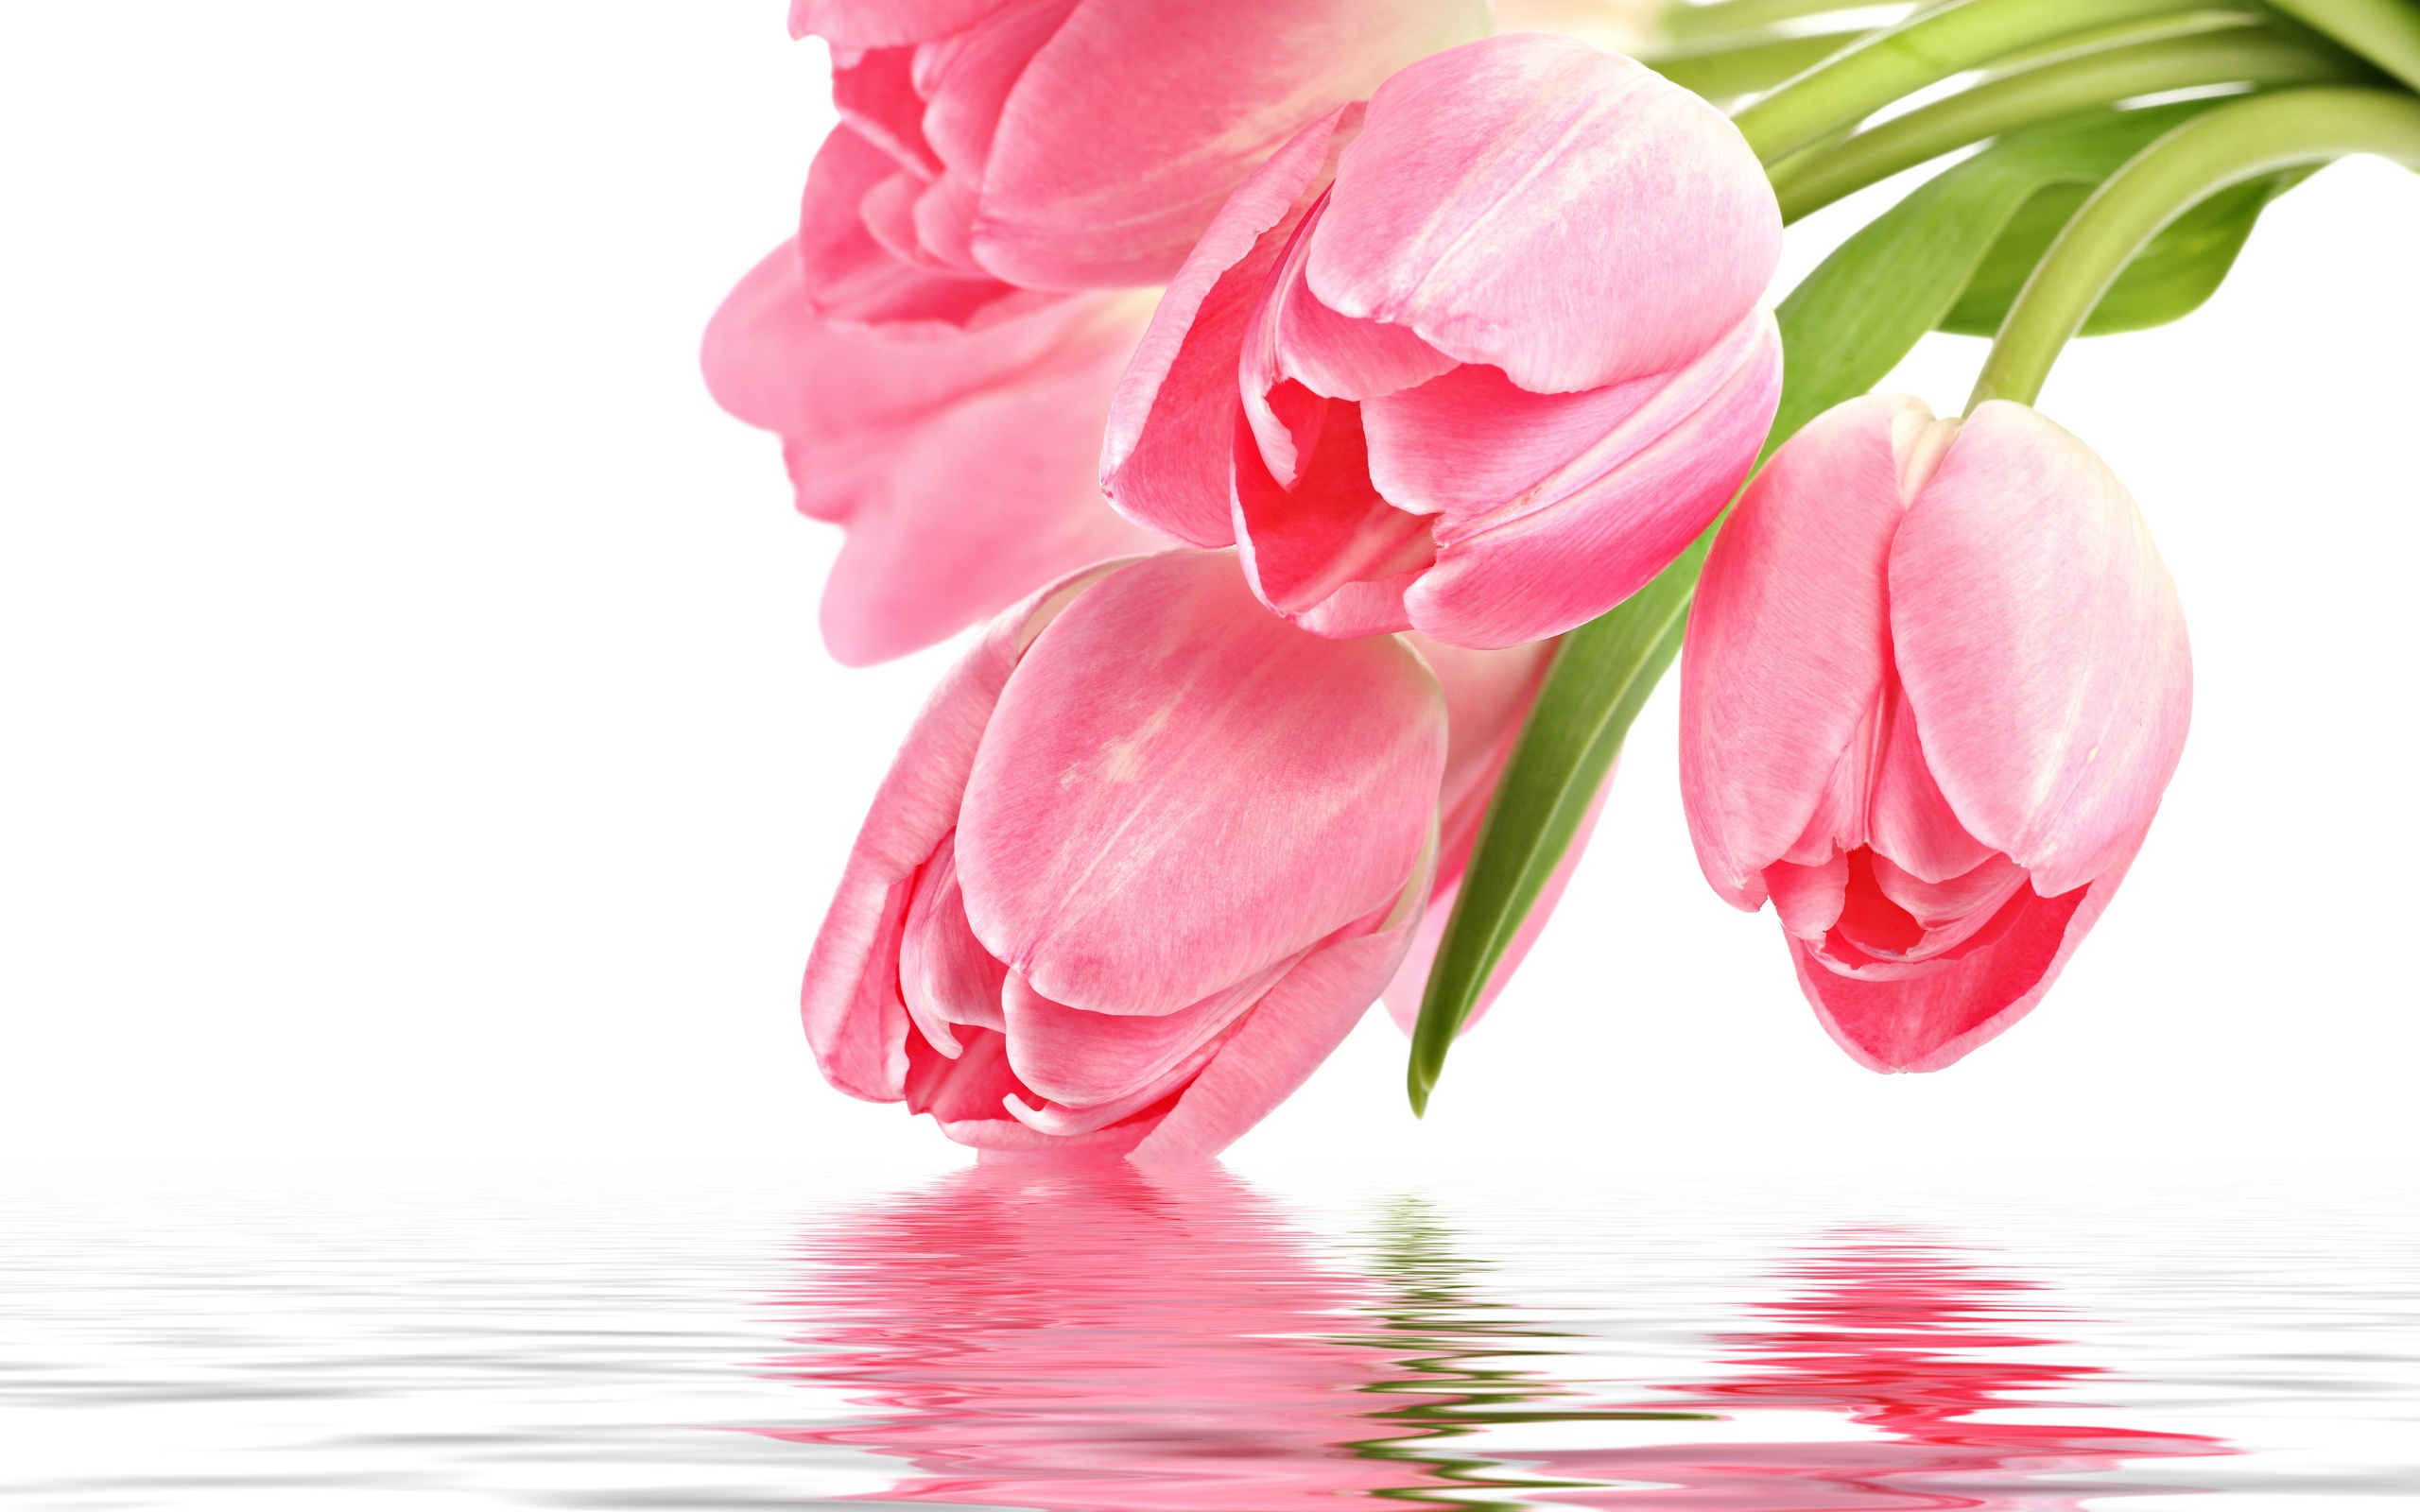 Download Pink Tulips 22698 2560x1600 px High Resolution Wallpaper ...